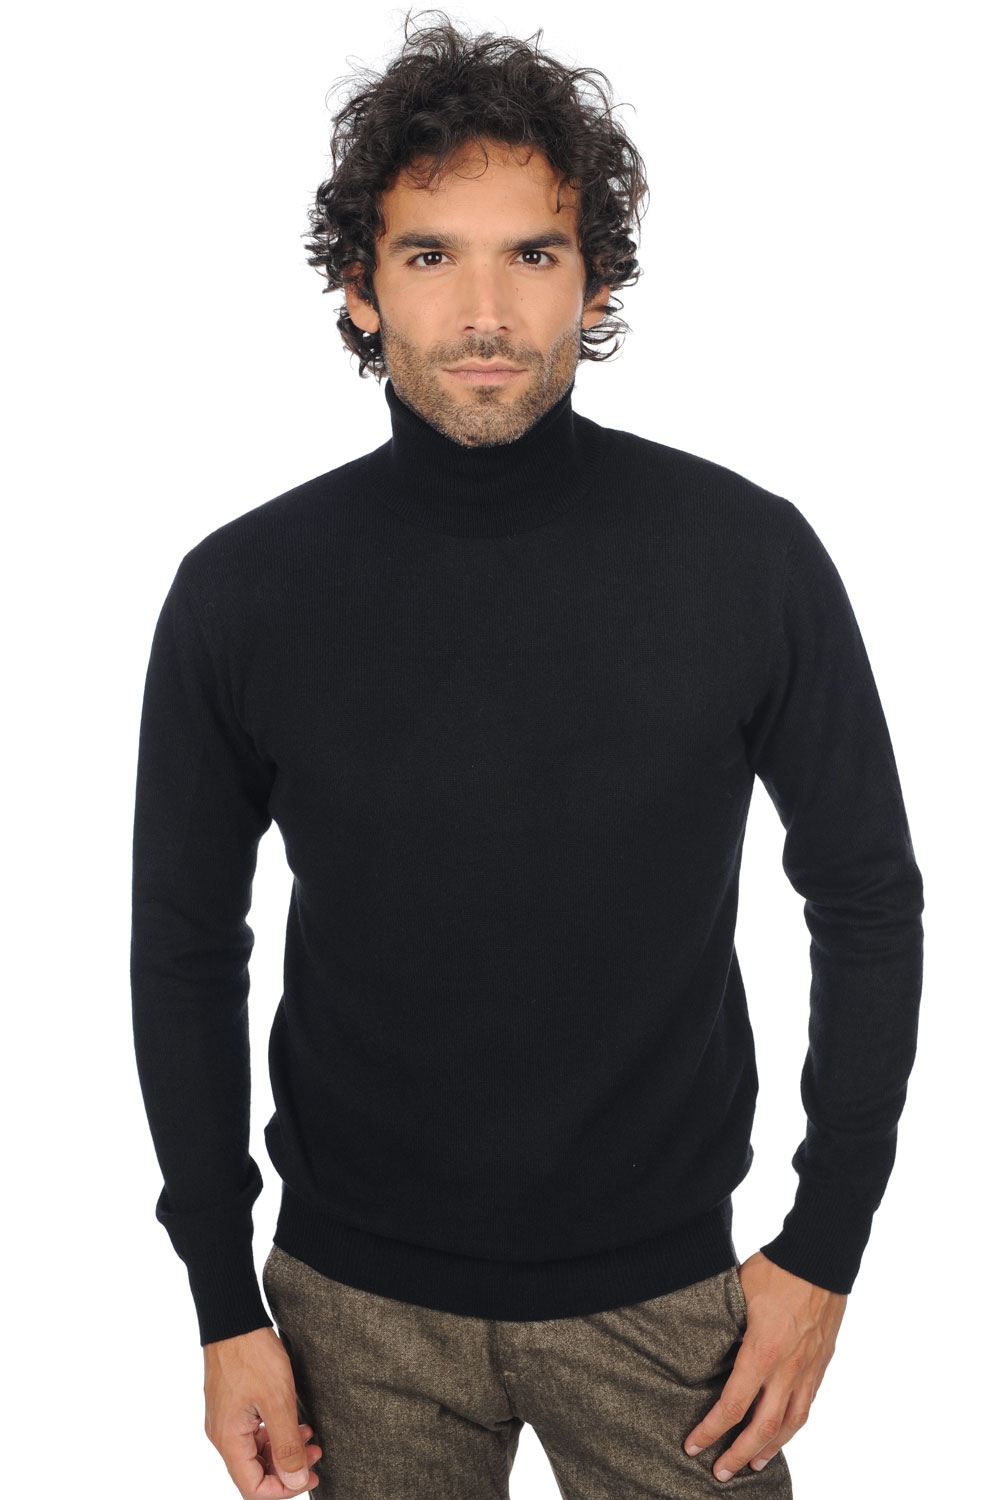 Cashmere men basic sweaters at low prices tarry first black m